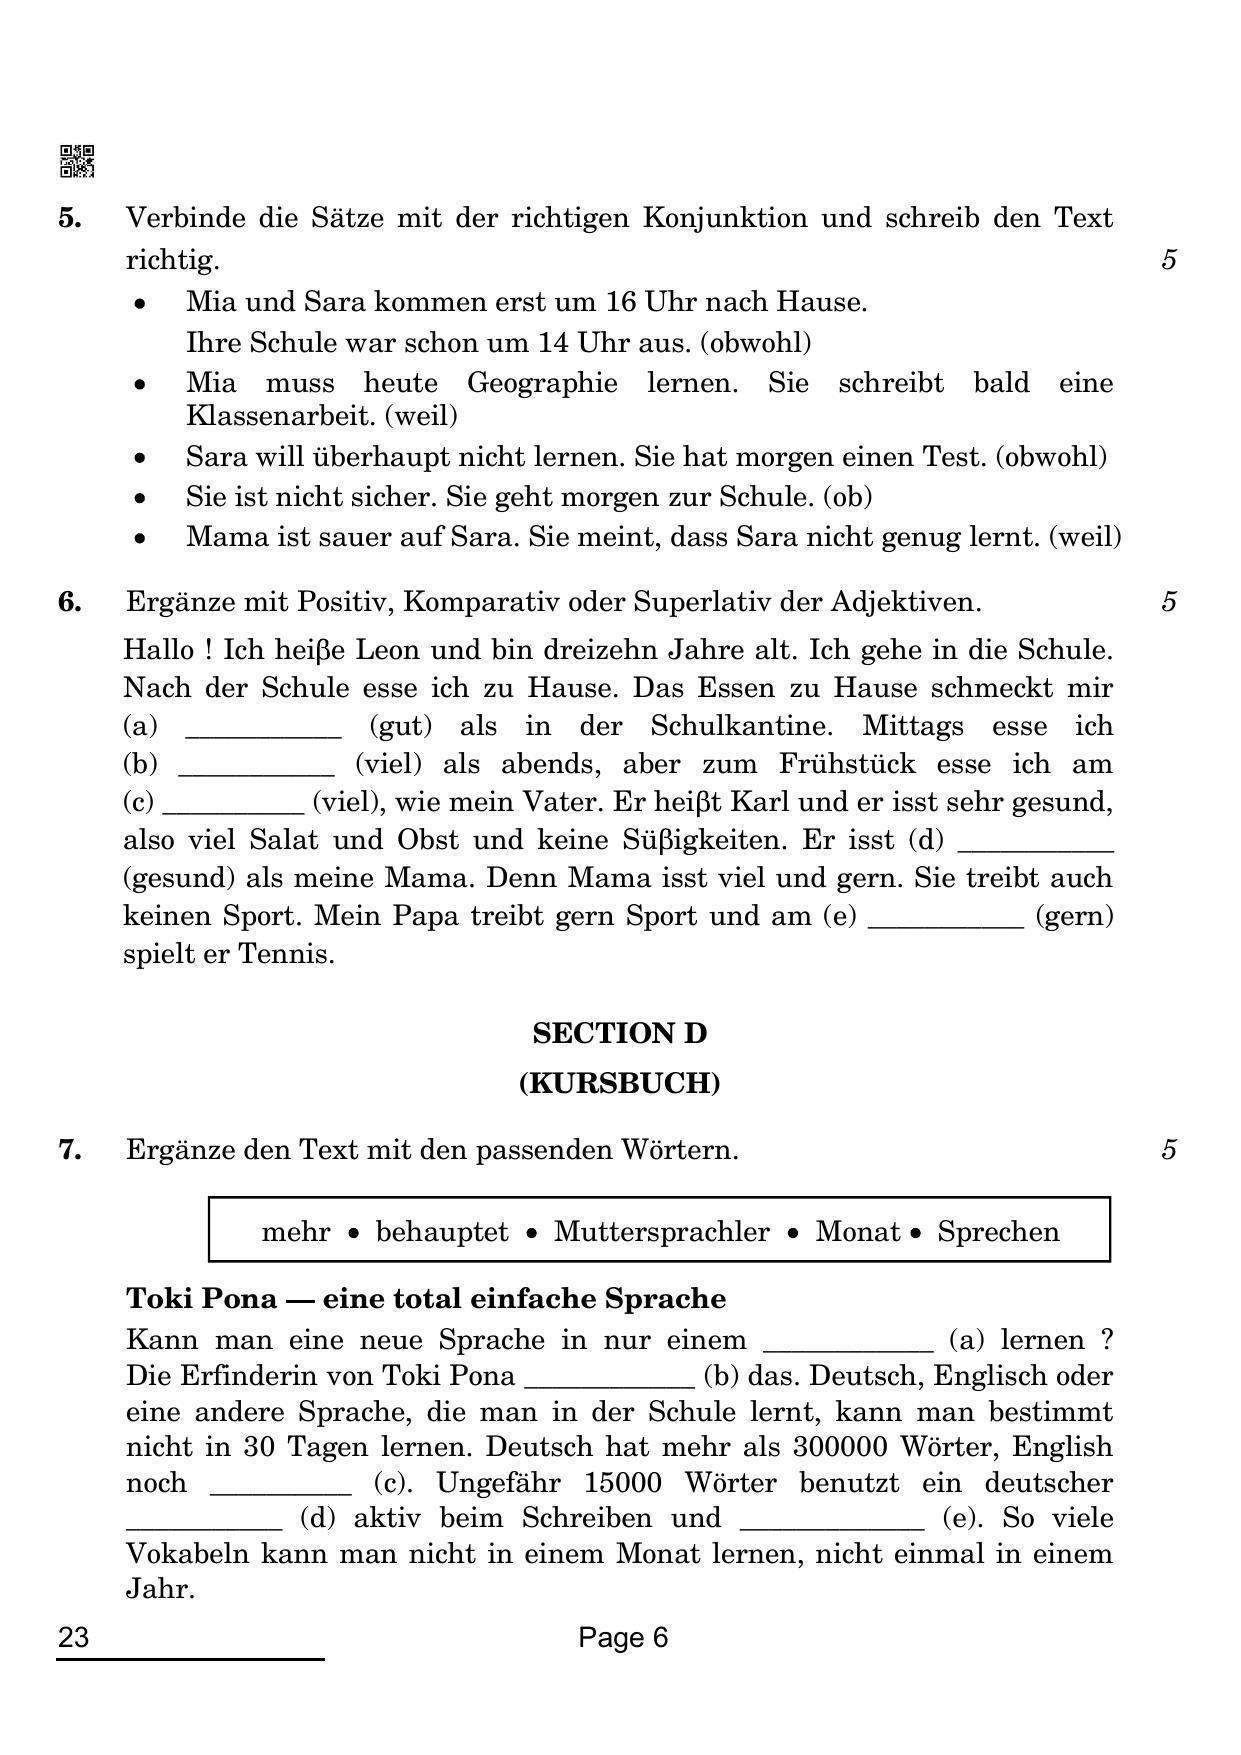 CBSE Class 10 23_German 2022 Question Paper - Page 6